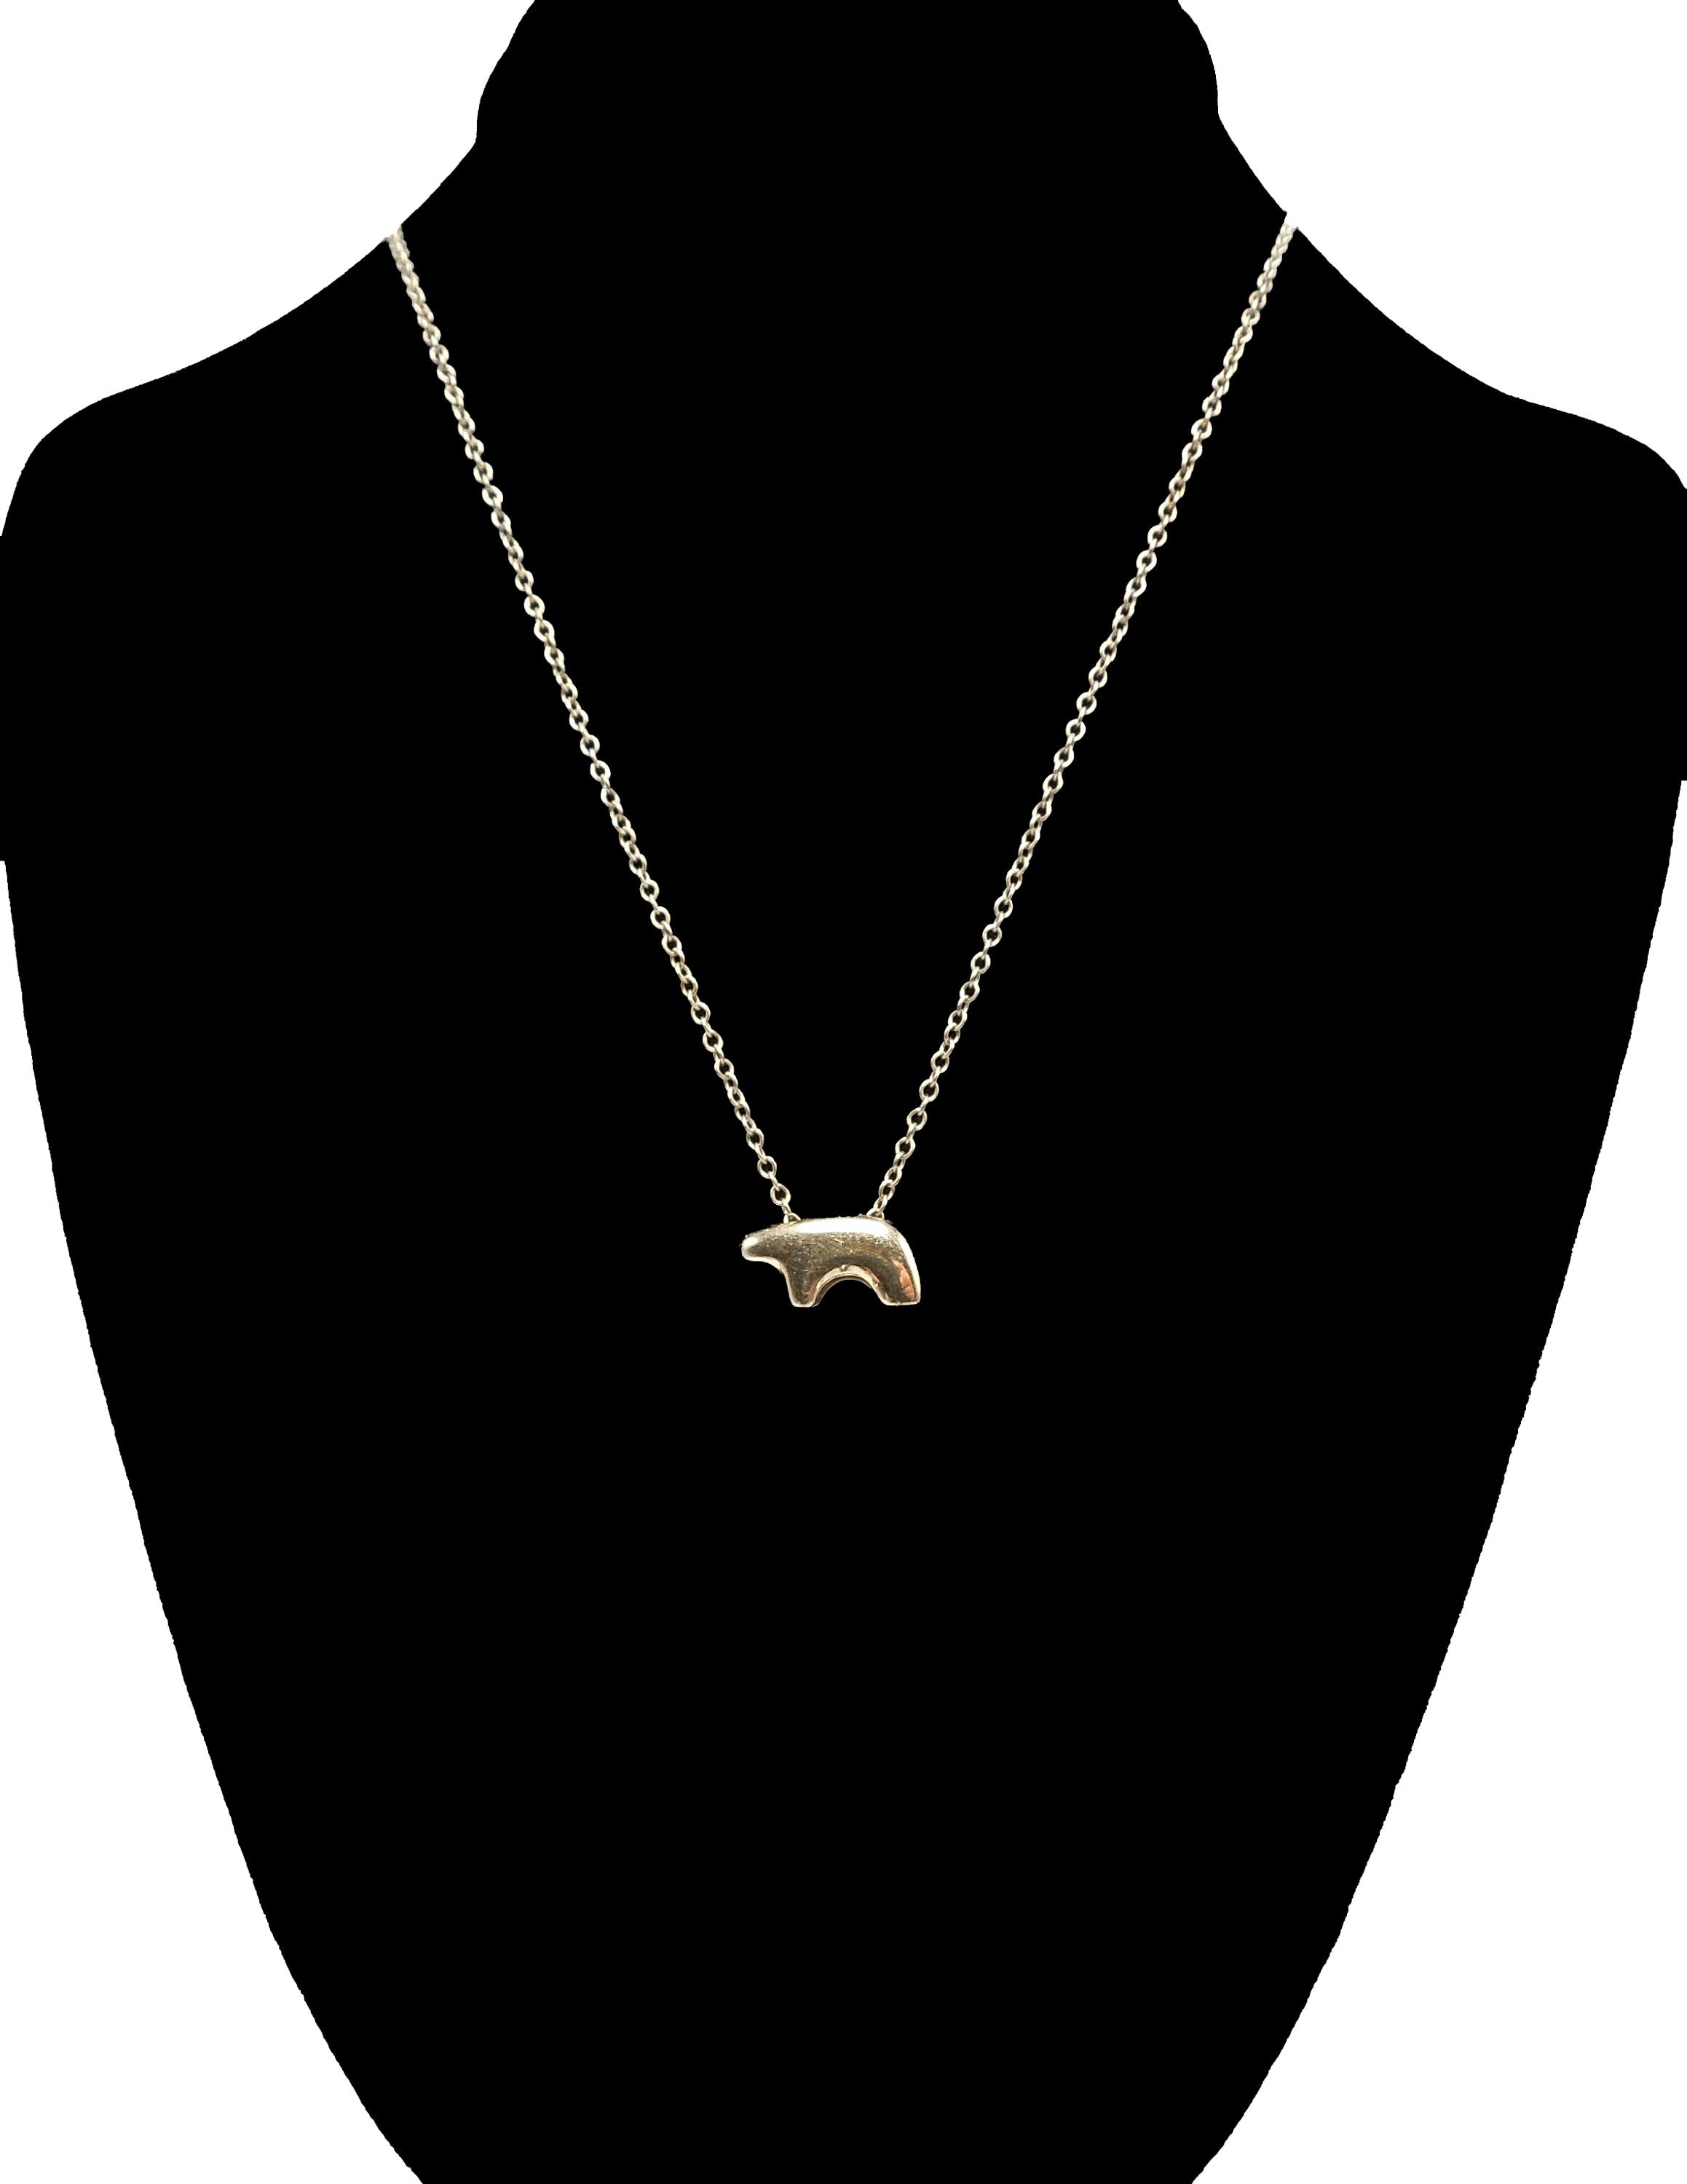 Stylized Navajo Bear Necklace in 14K Yellow Gold